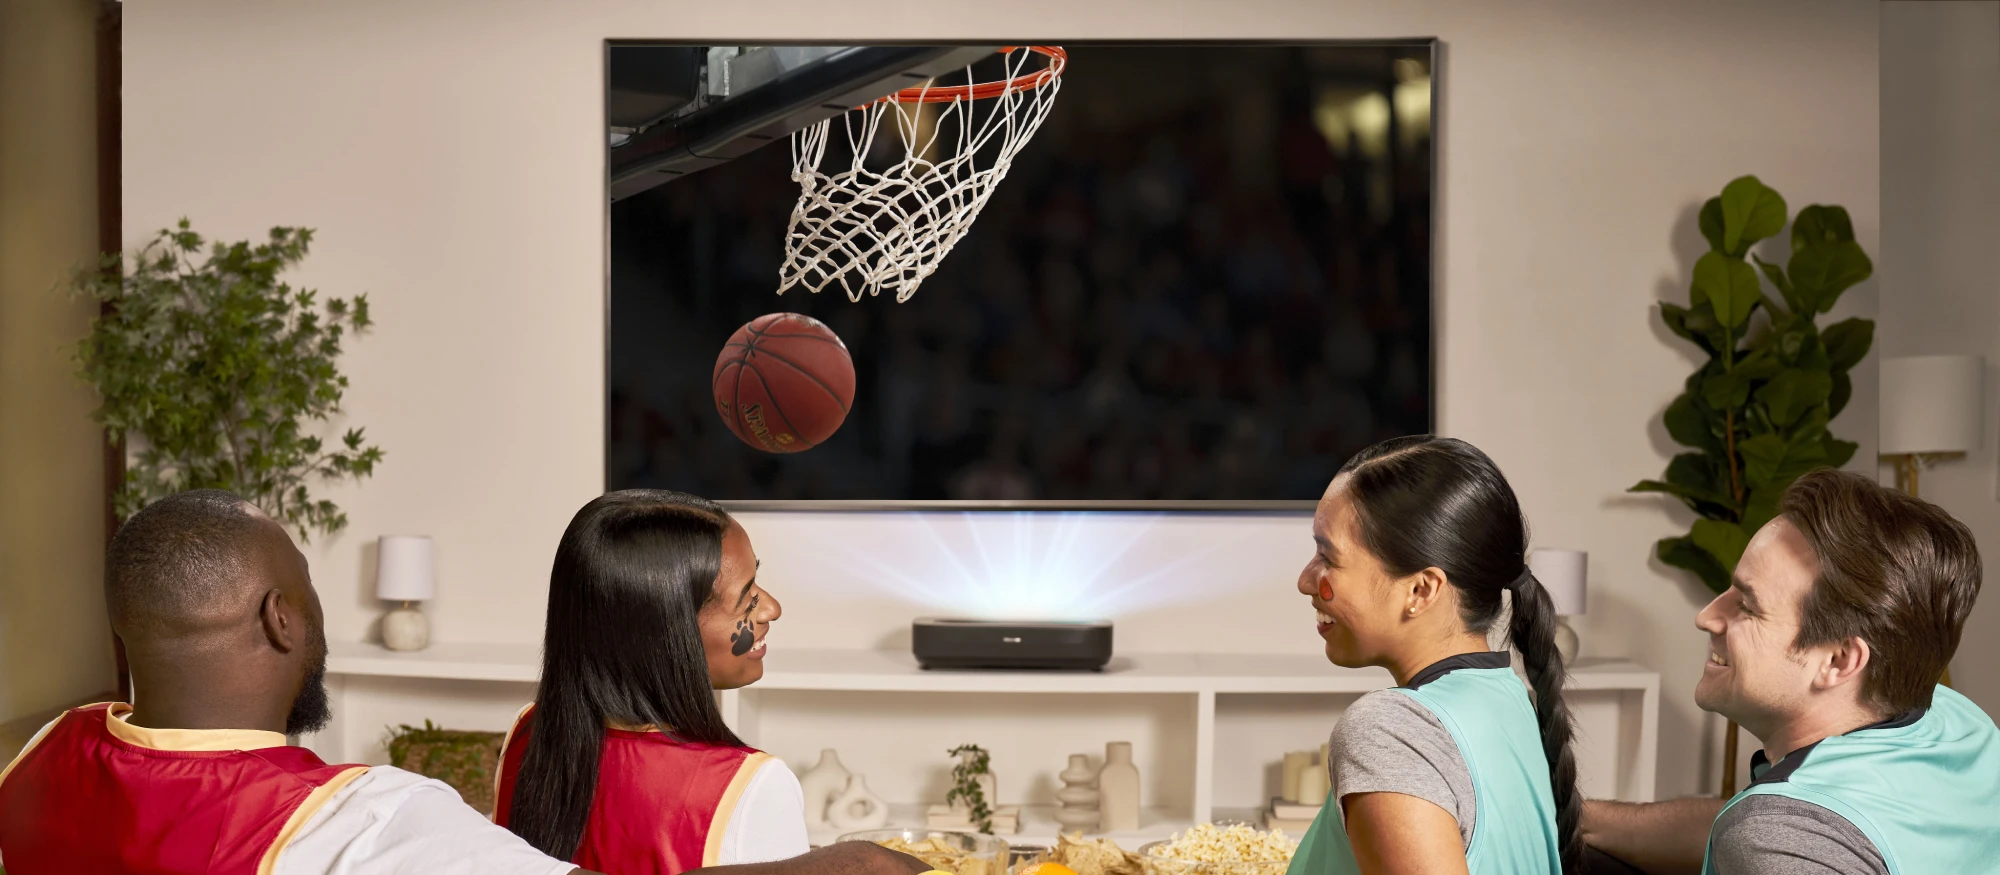 Best style of TV for watching sports